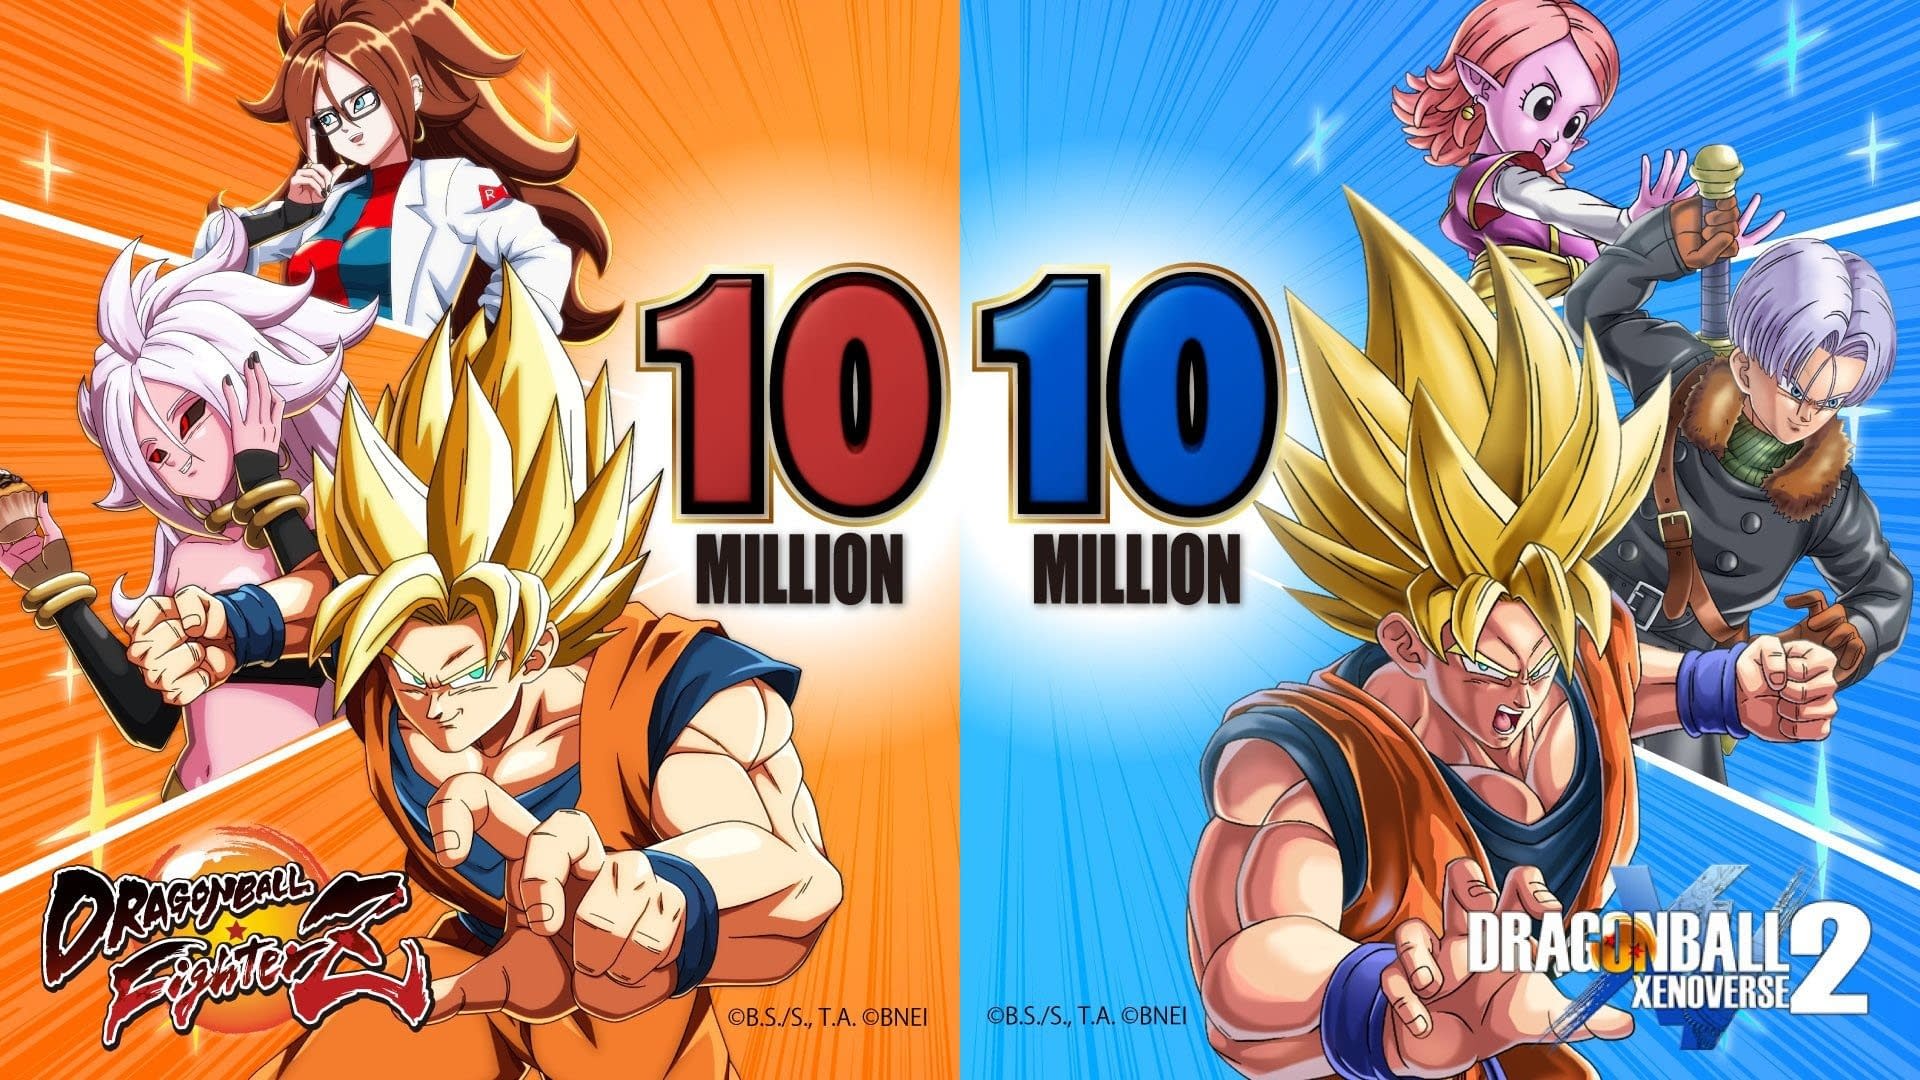 Dragon Ball Fighterz and Dragon Ball Xenoverse 2 sales reached 10 million